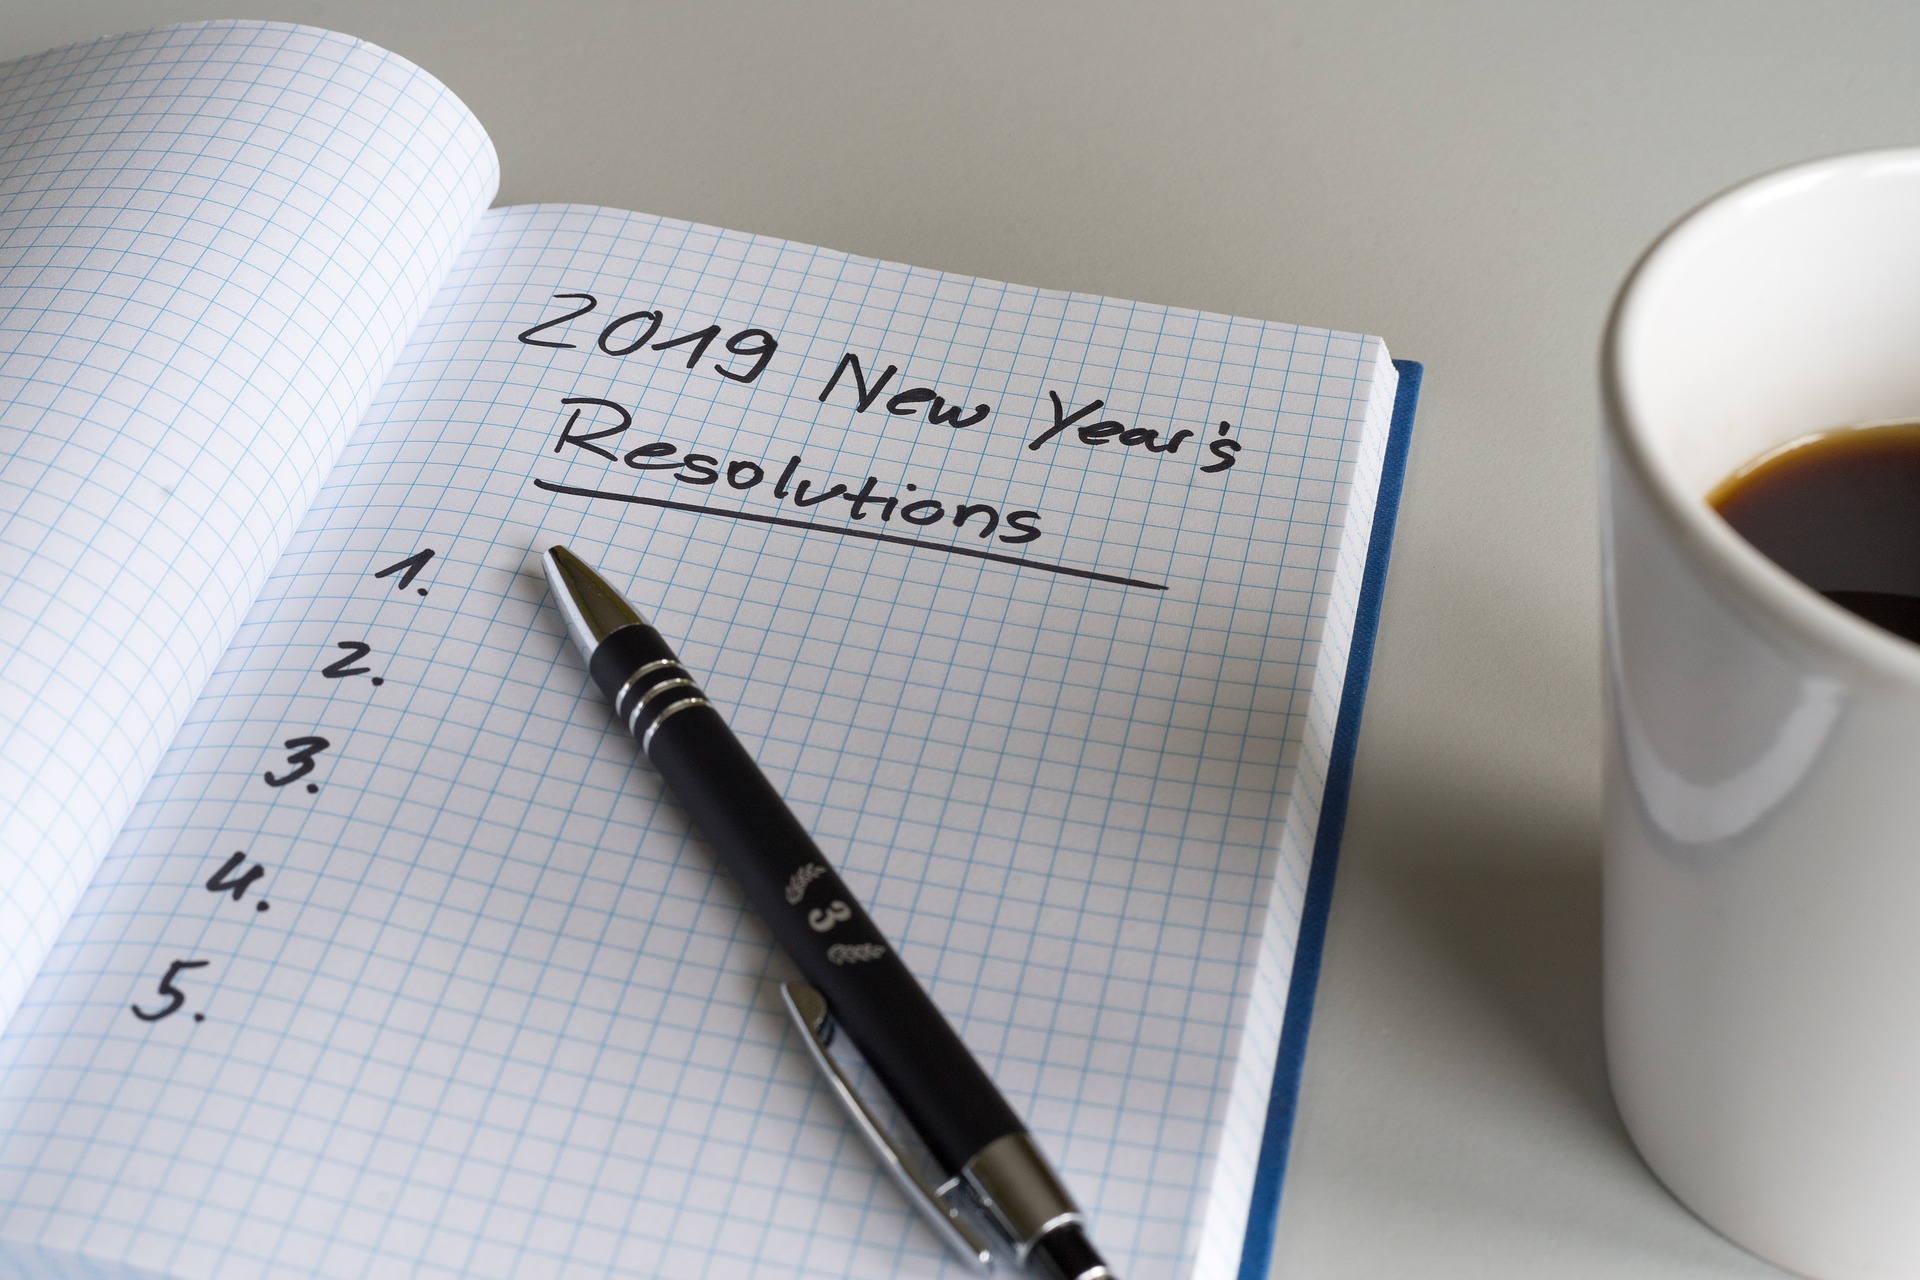 OPINION: Forming New Year’s resolutions supports health, wellness